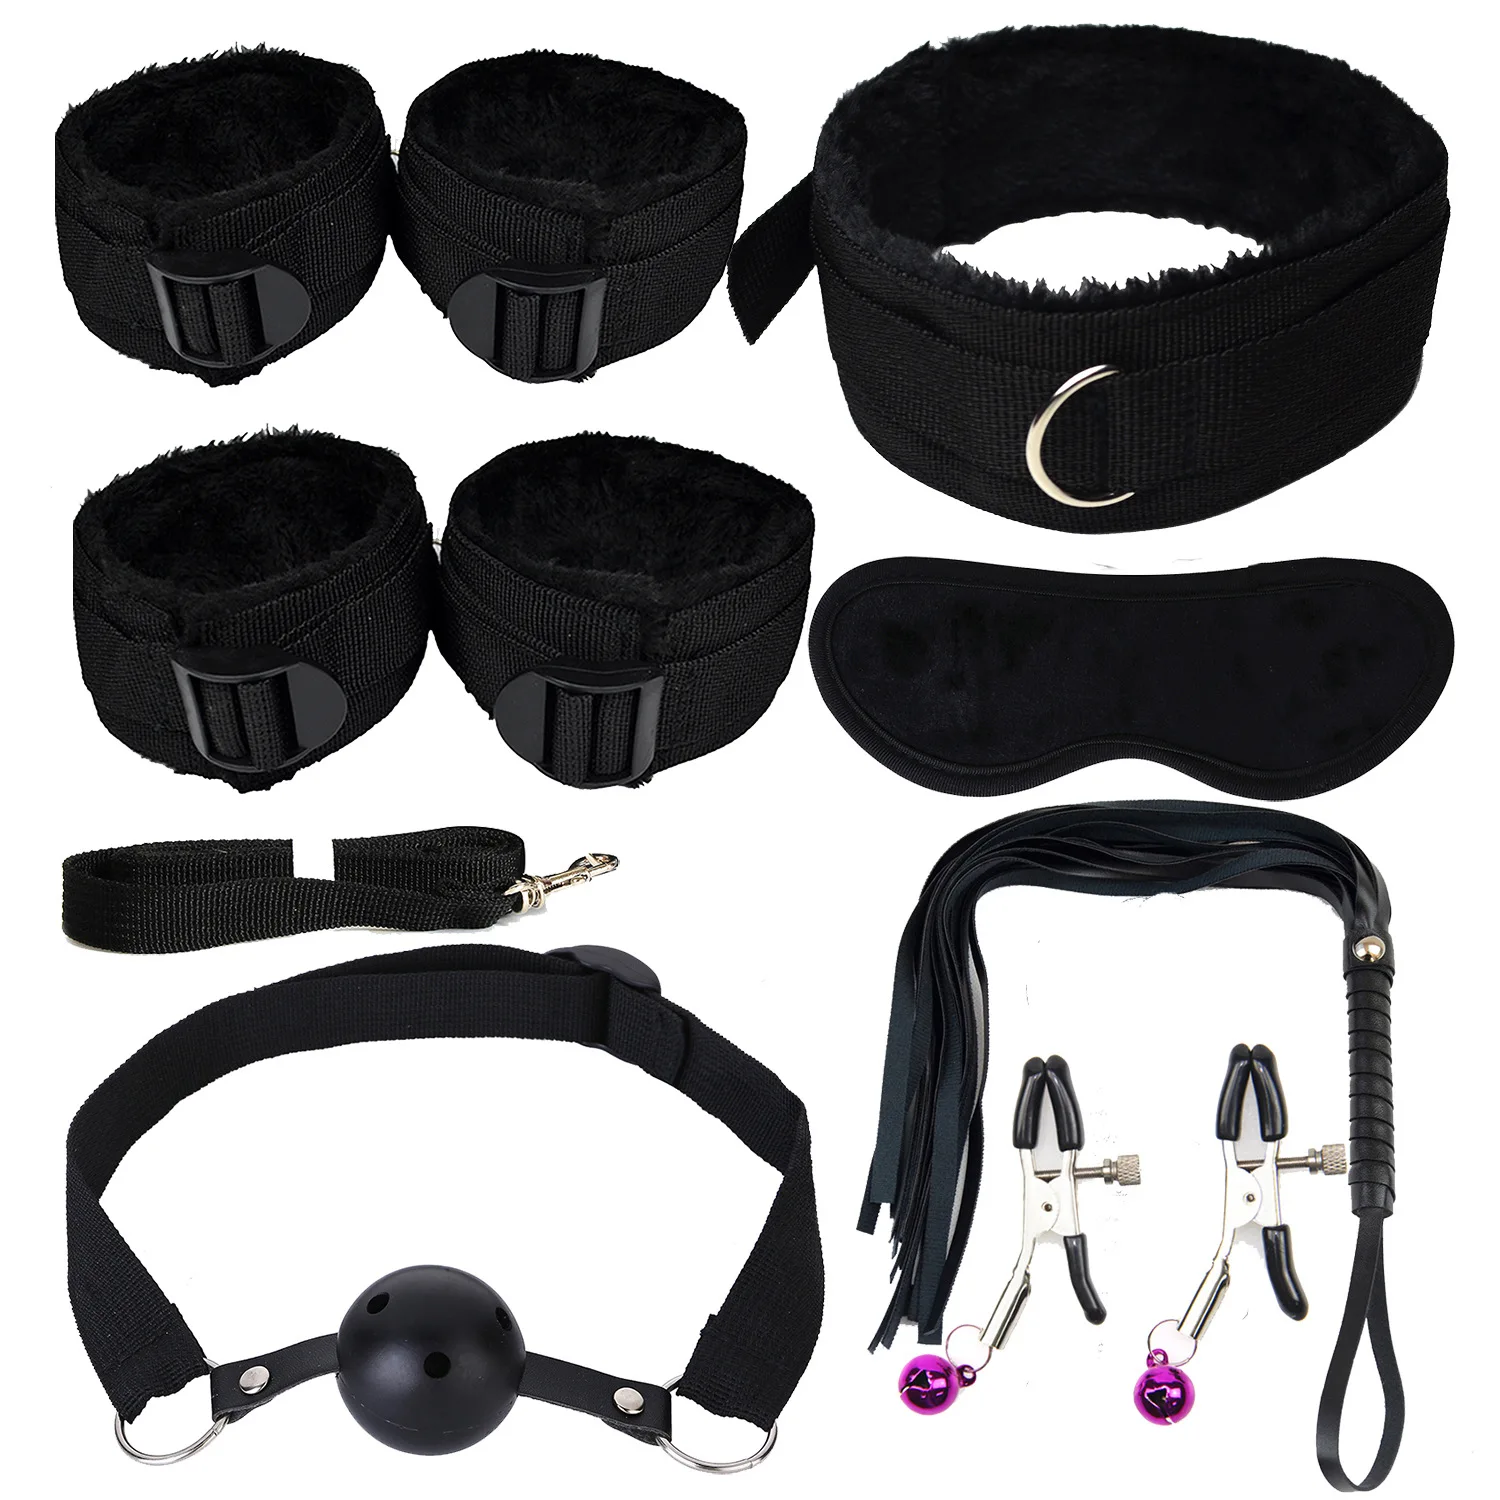 DUOAI 7PCs BDSM Adult Sex Toys Plush Handcuffs Strap Whip Rope Bed Restraints Bandage Couples Cosplay